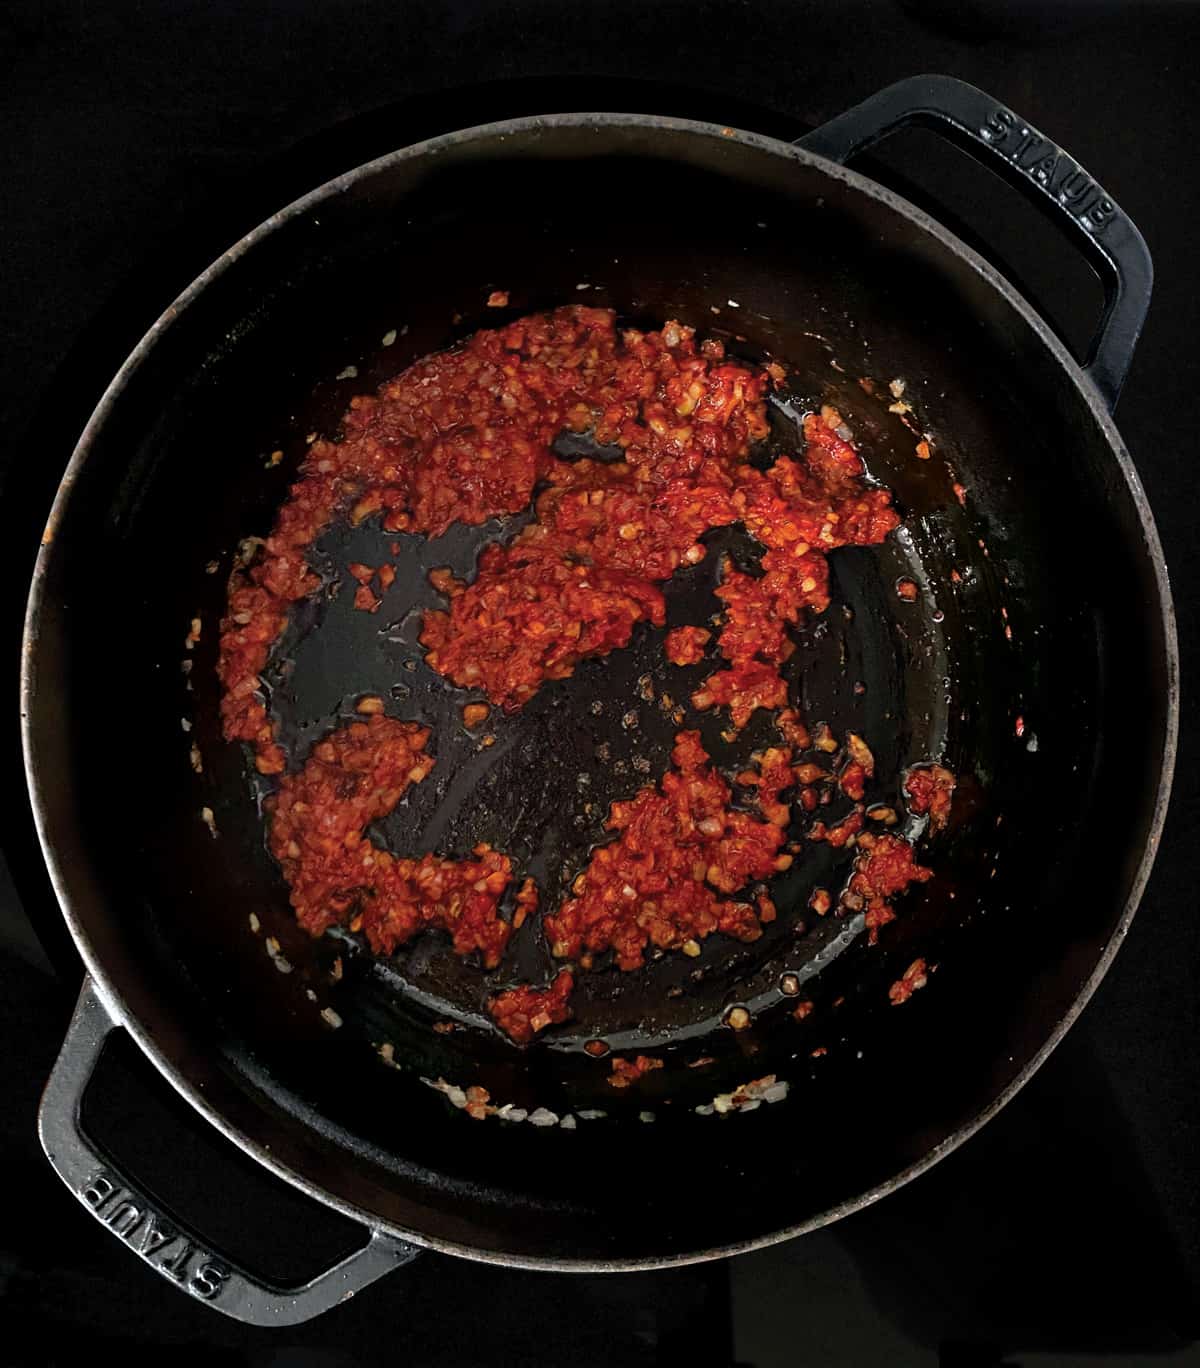 Diced onion with tomato paste and seasonings in a stockpot.
